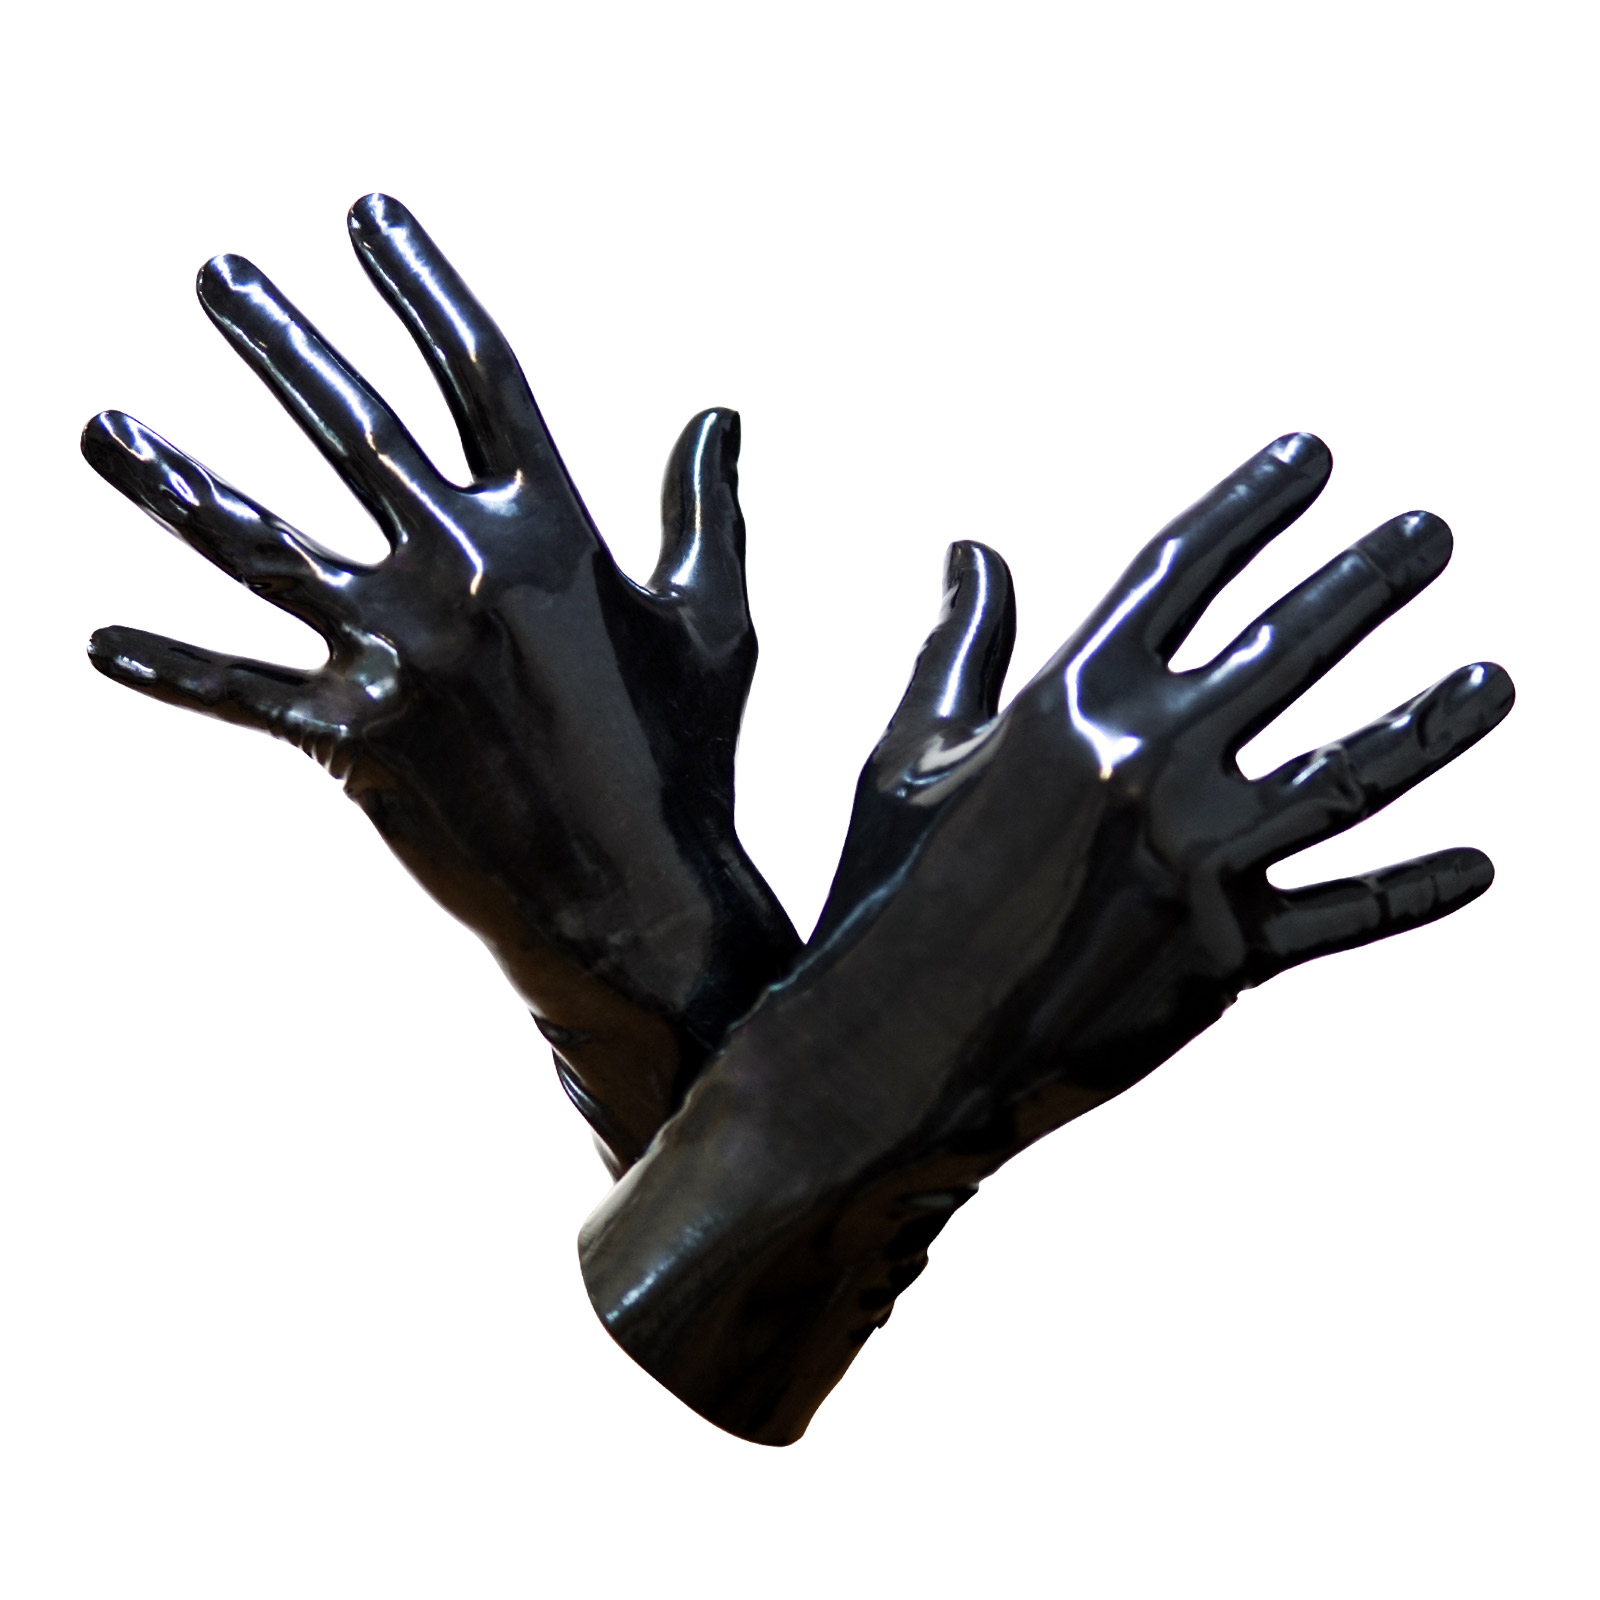 Toylie Latex Gloves «XS» black, seamless, with excellent anatomic fit